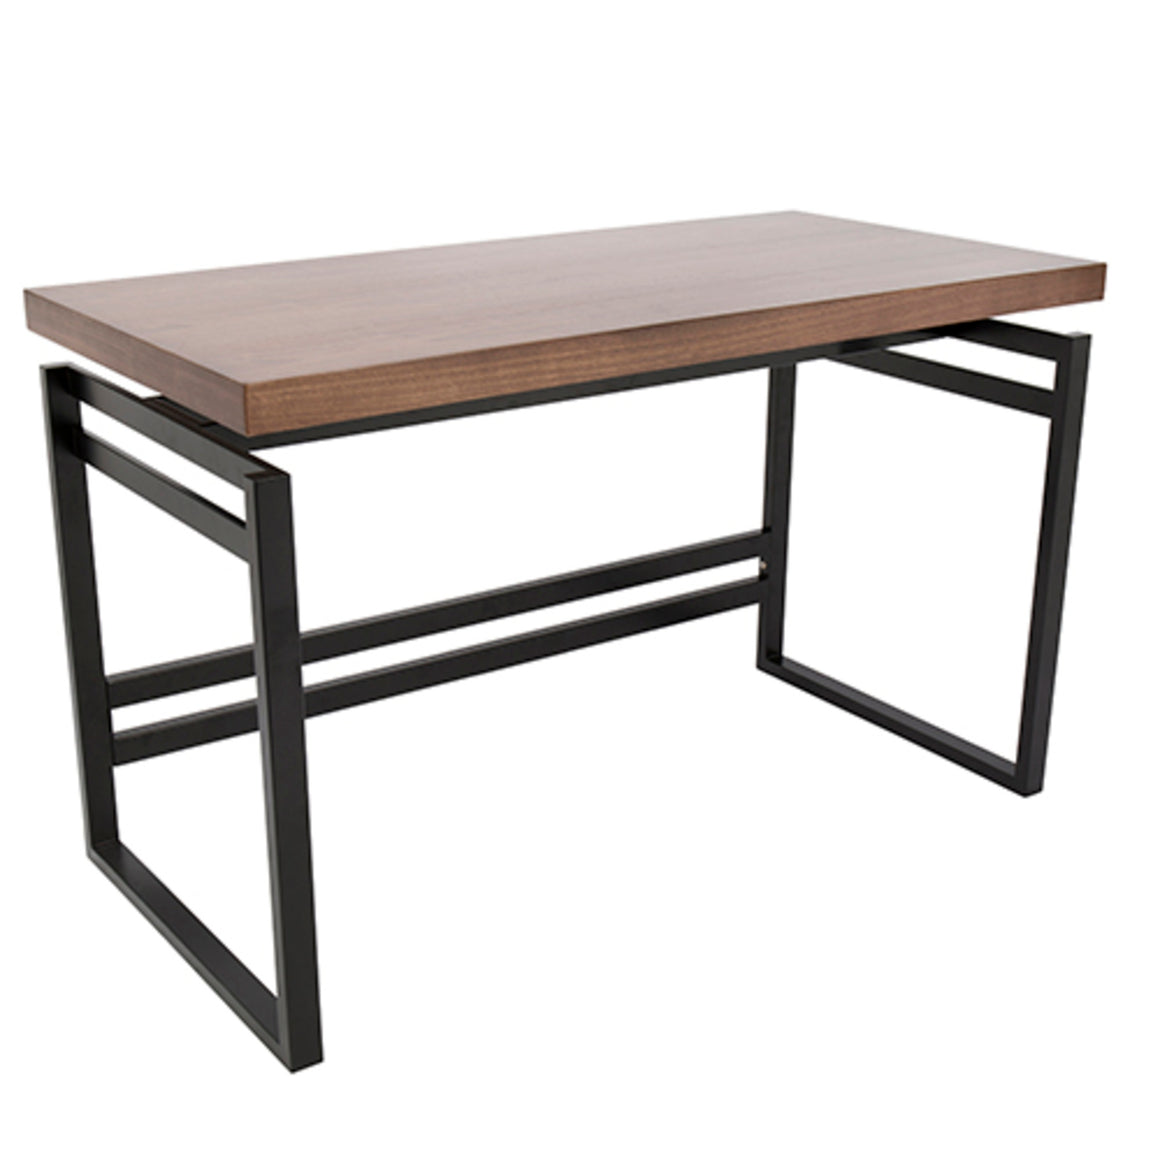 Drift Industrial Desk in Black and Walnut by LumiSource